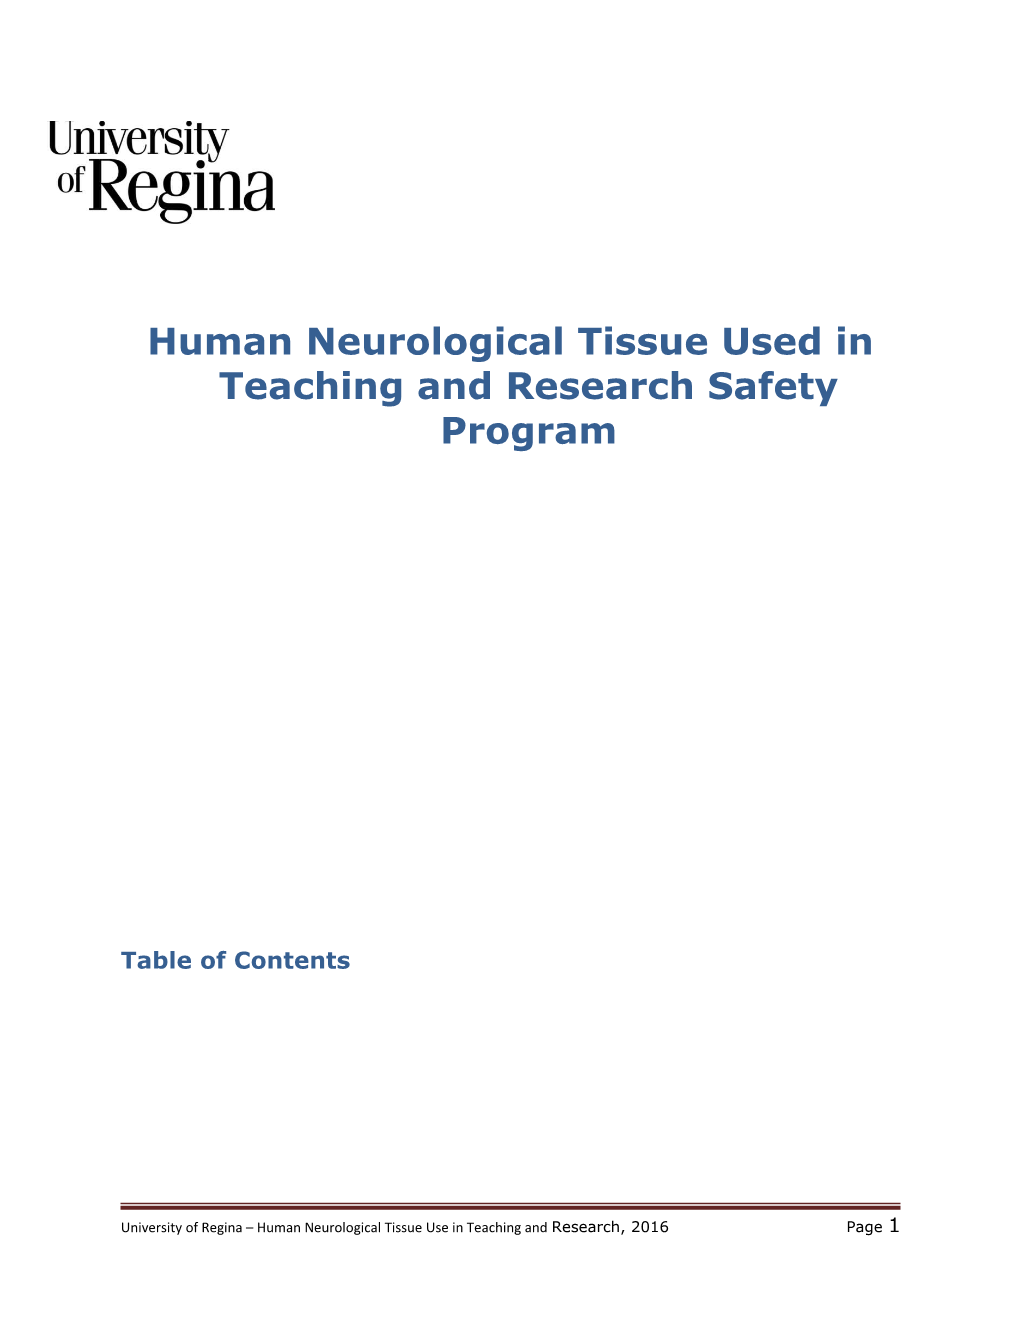 Human Neurological Tissue Used in Teaching and Research Safetyprogram